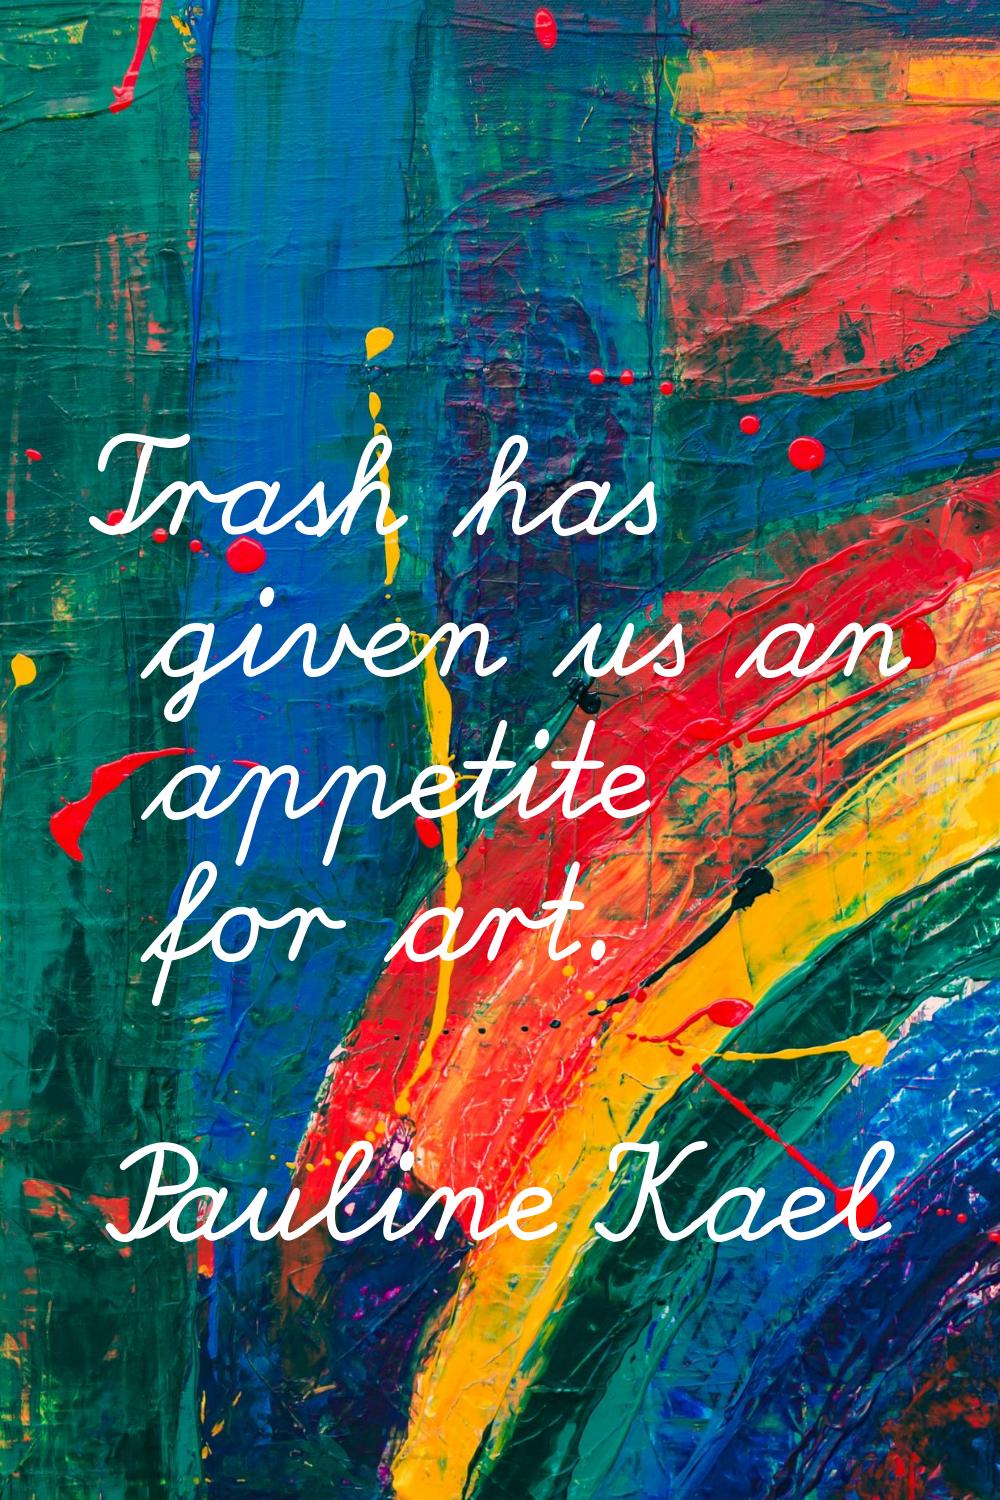 Trash has given us an appetite for art.